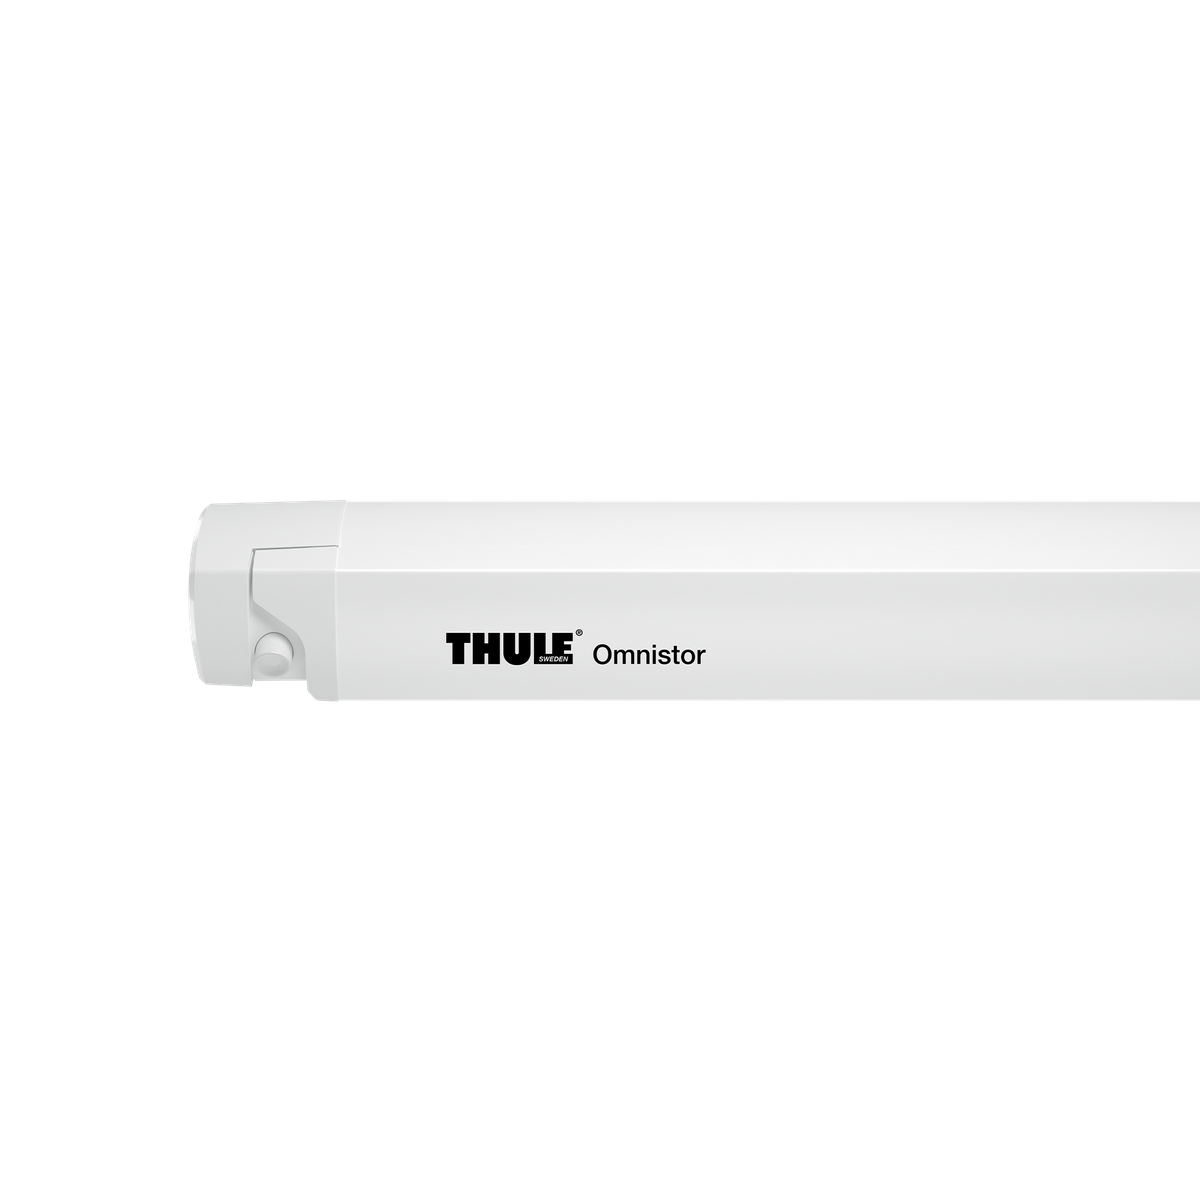 Thule Omnistor 6300 motorized roof awning 5.03x2.50 white